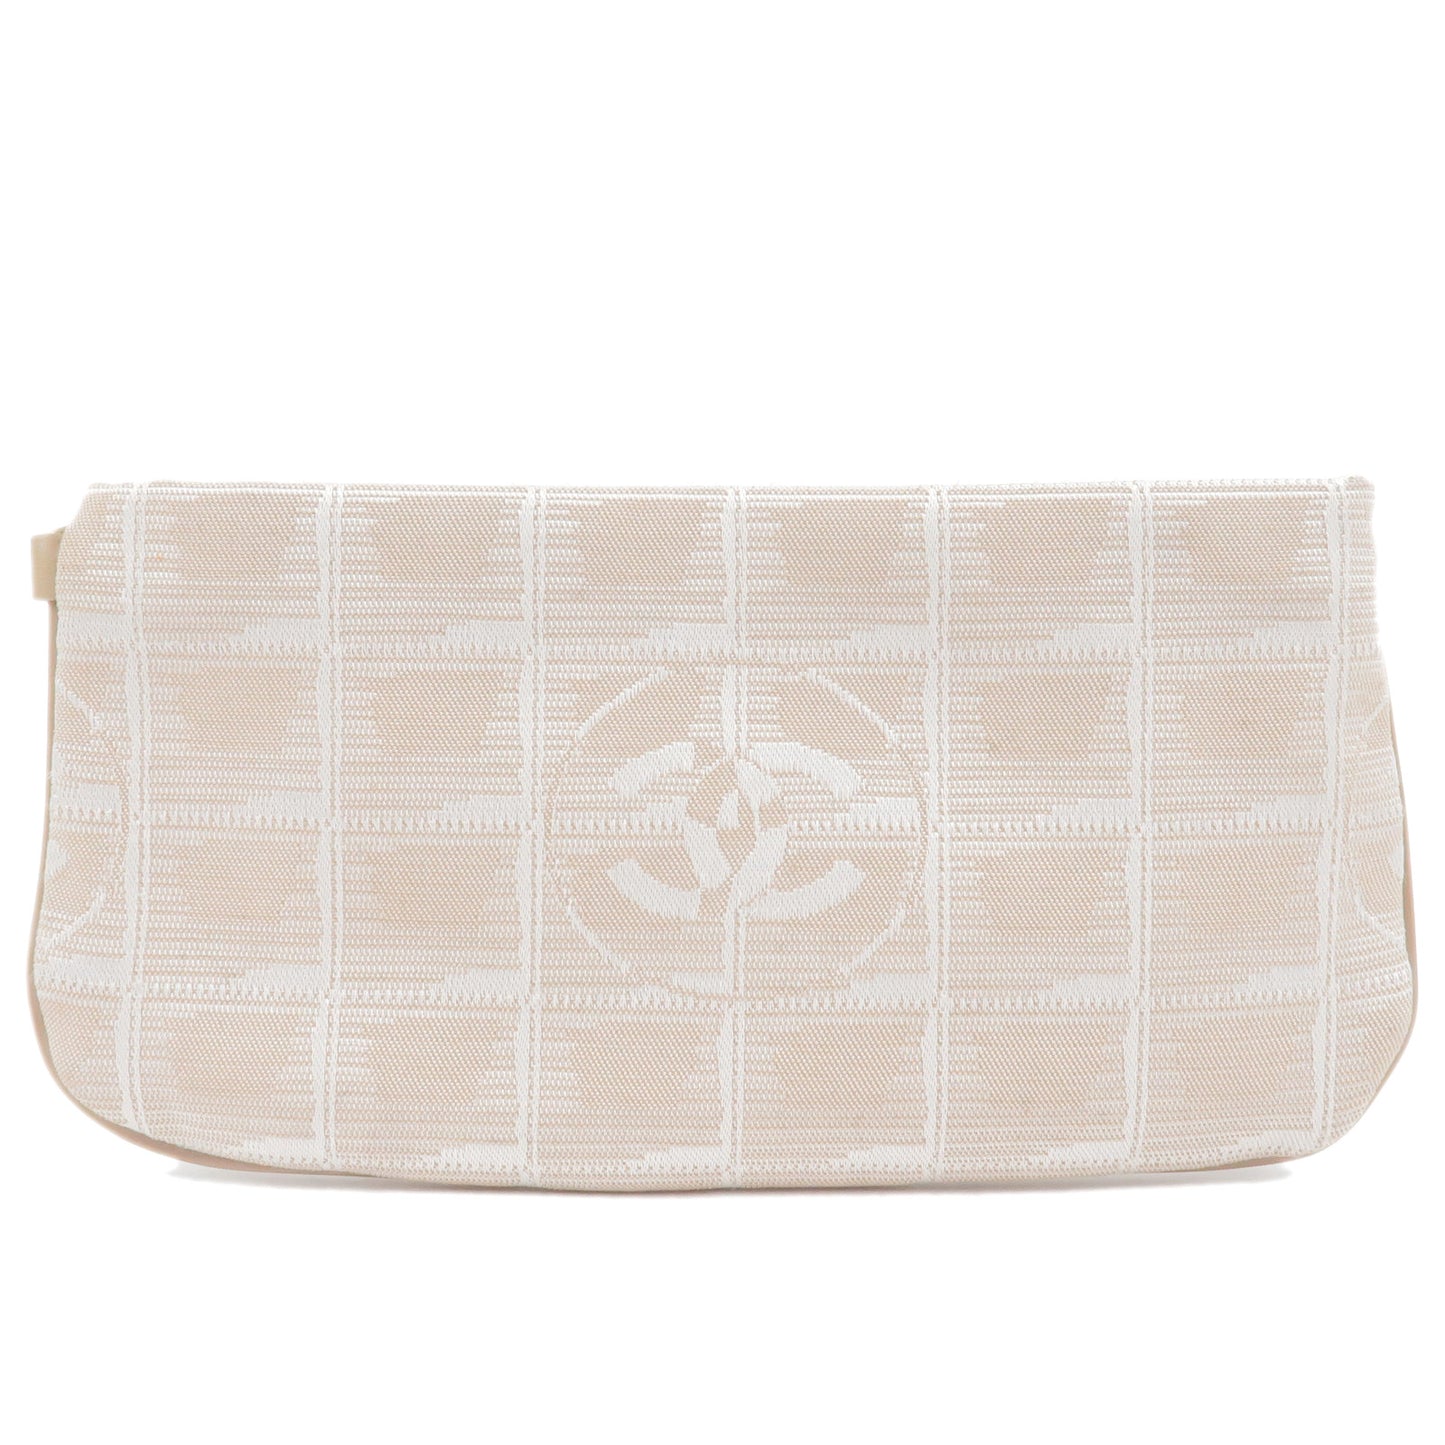 CHANEL-Travel-Line-Nylon-Jacquard-Leather-Pouch-Beige-A20532